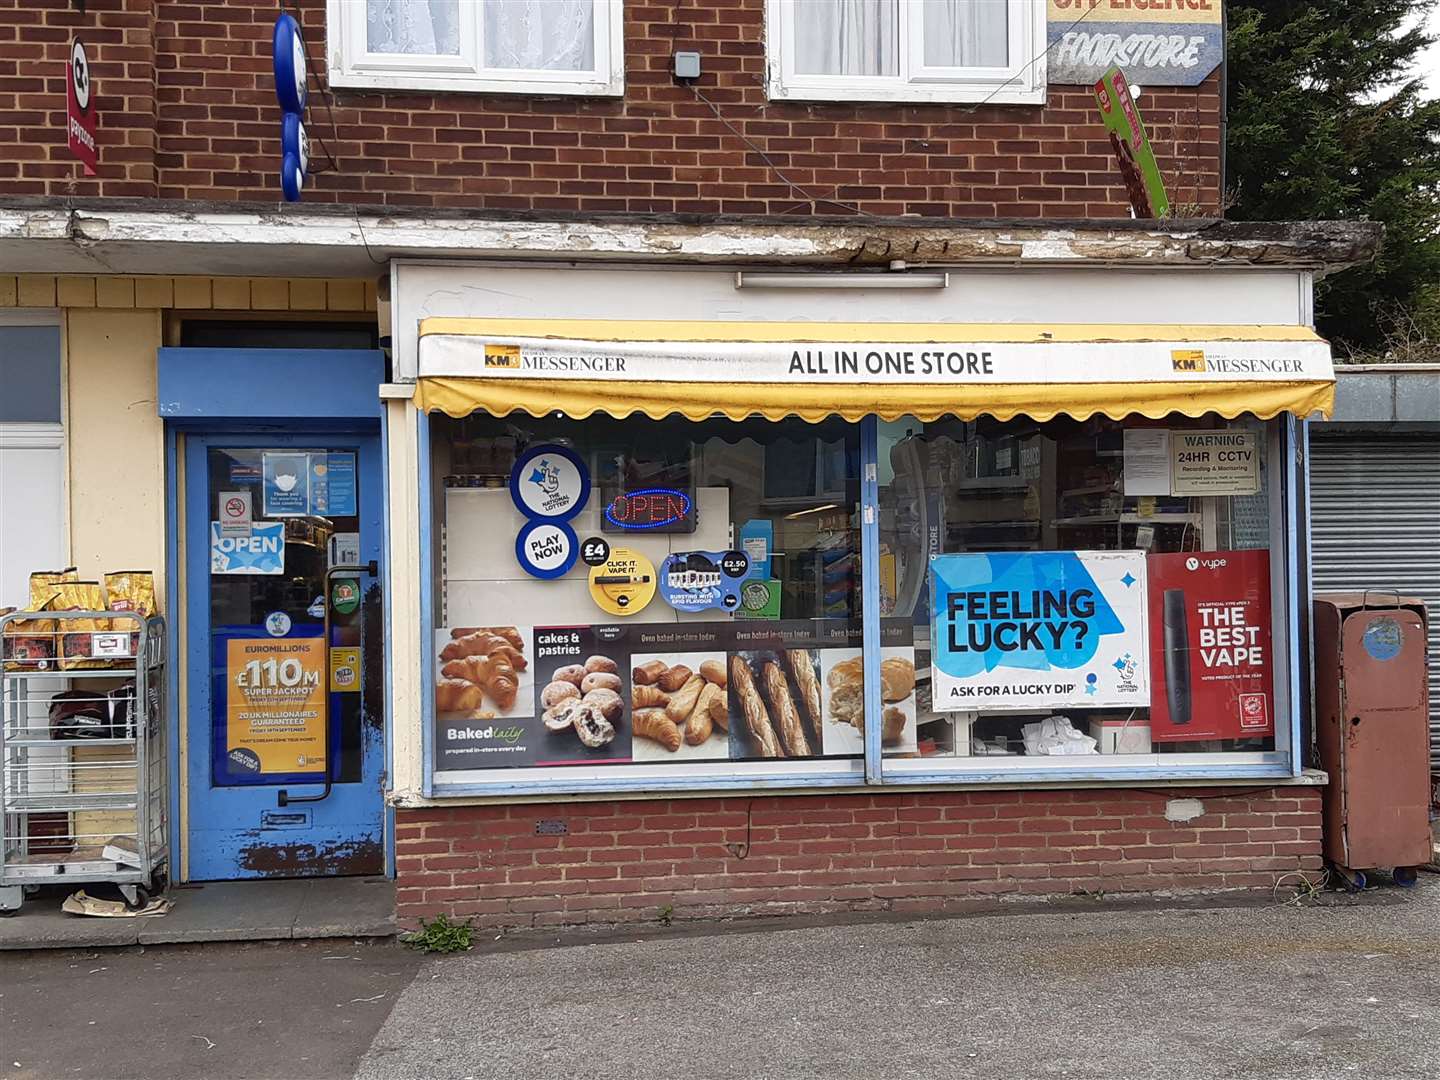 All-In-One Store in Forge Lane, Gillingham